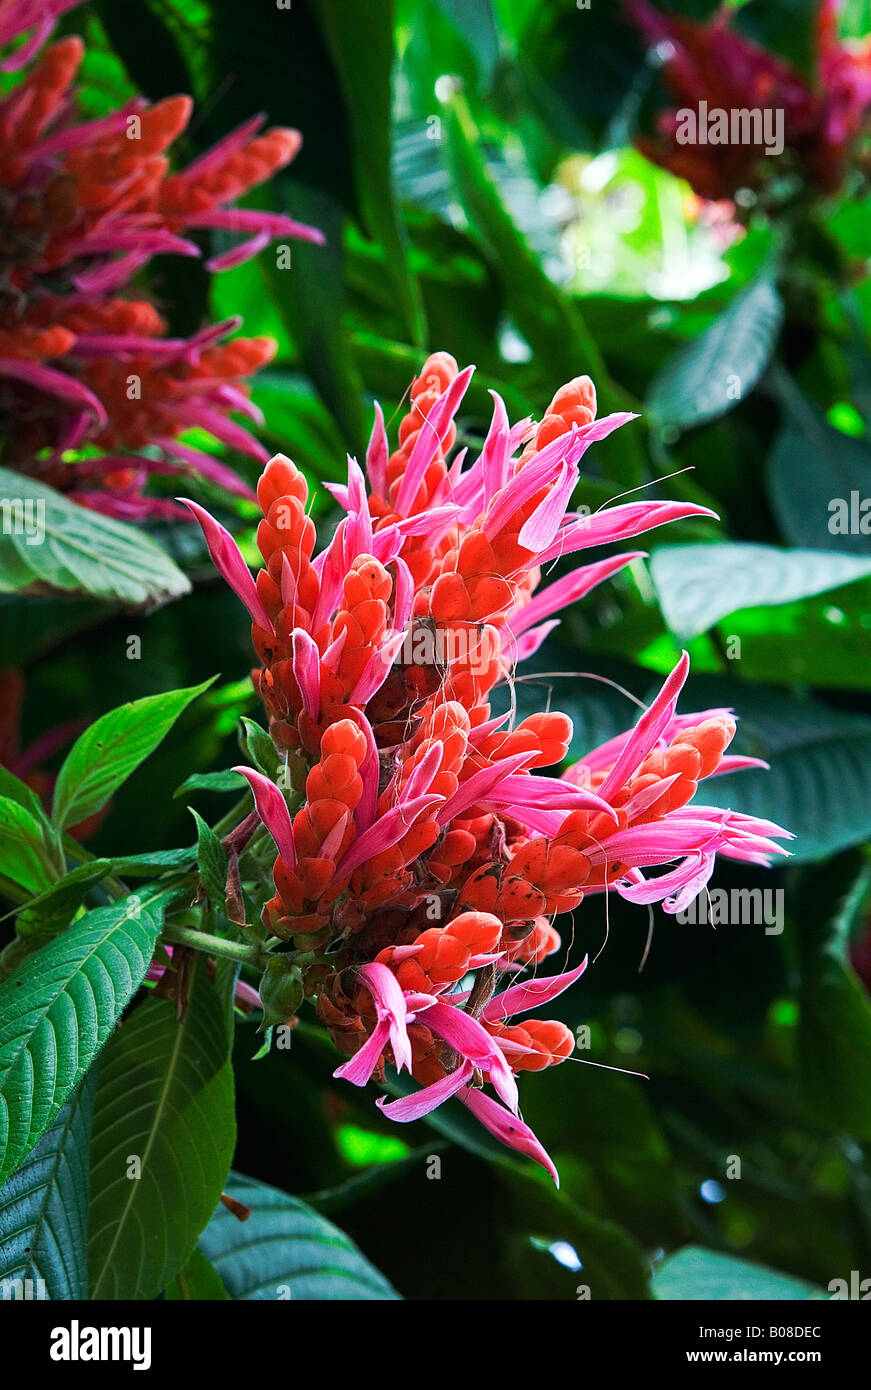 Image of a cluster of pink and red flowers found on the Aphelandra tree originally found in Costa Rica Stock Photo